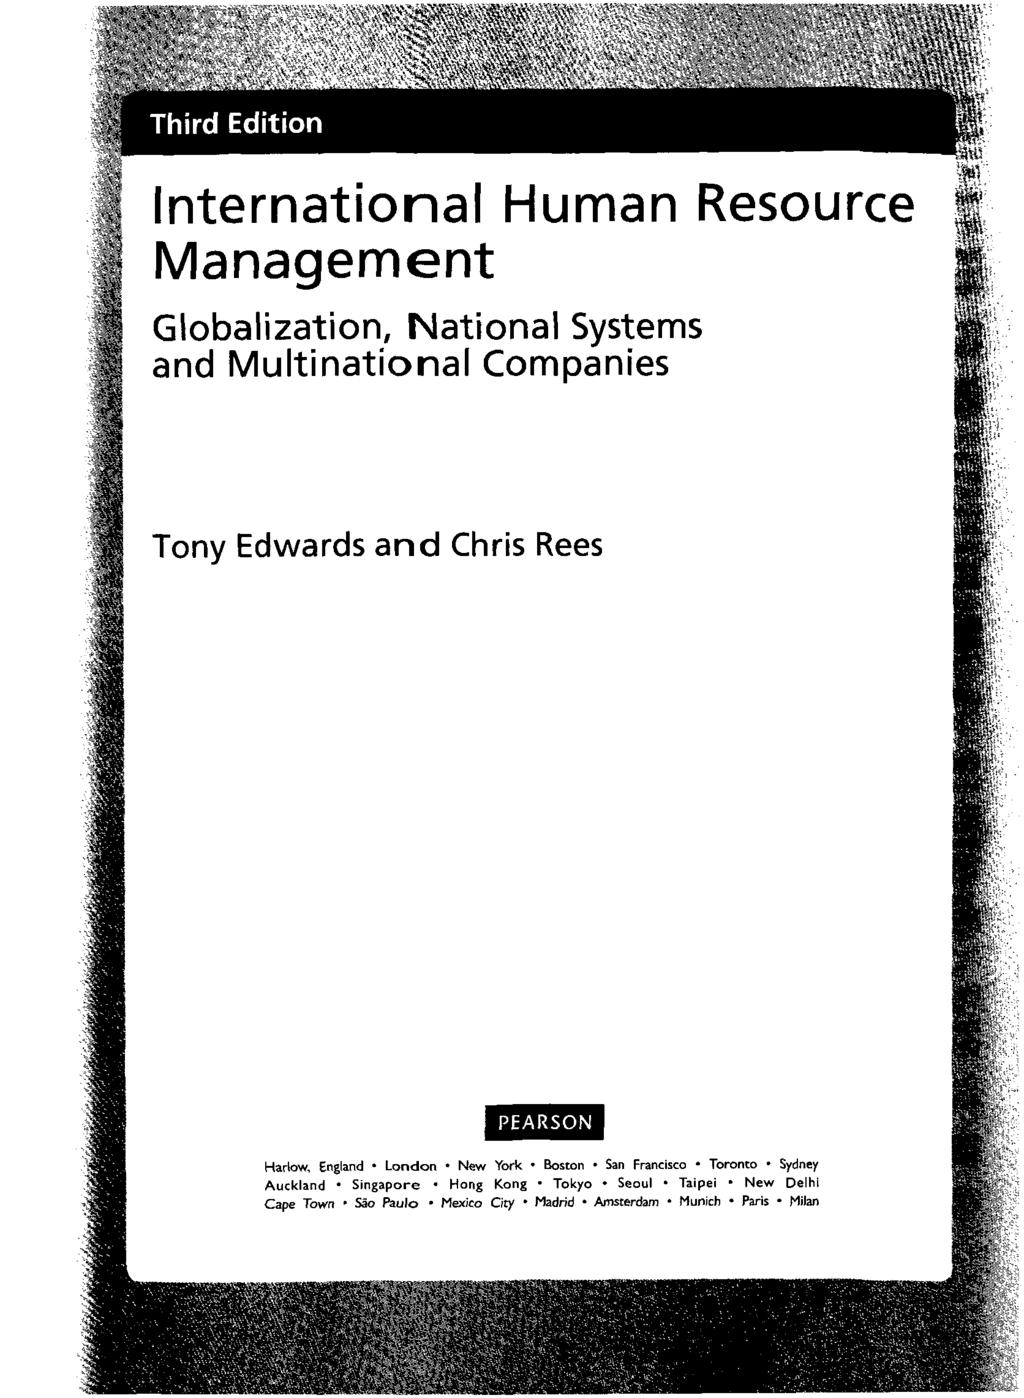 Third Edition International Human Resource Management Globalization, National Systems and Multinational Companies PEARSON Harlow, England London New York Boston